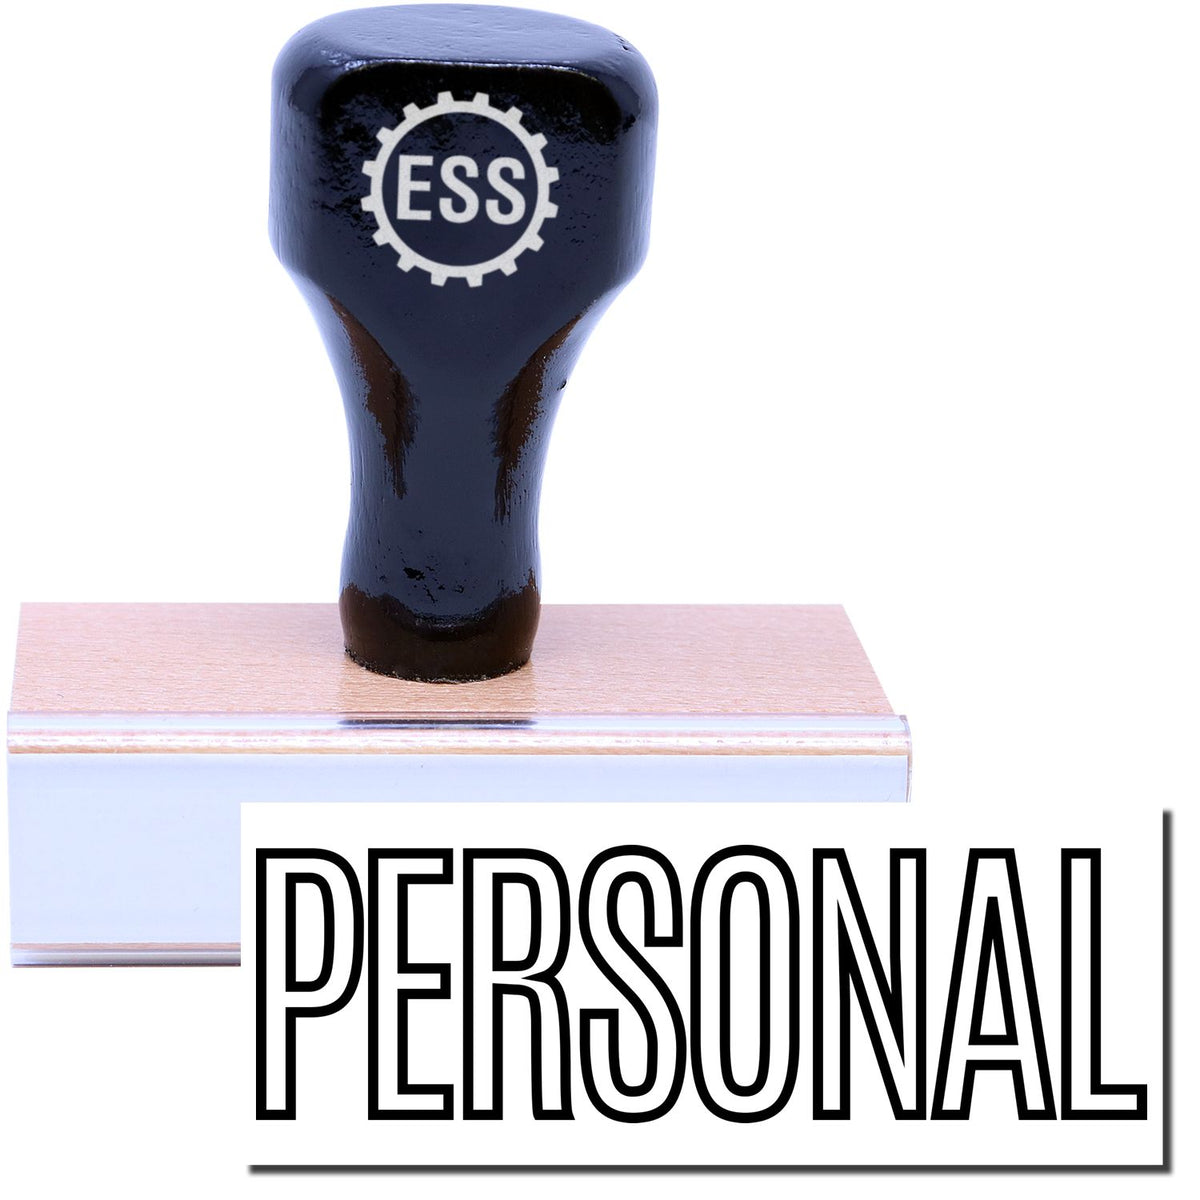 A stock office rubber stamp with a stamped image showing how the text &quot;PERSONAL&quot; in a large outline font is displayed after stamping.